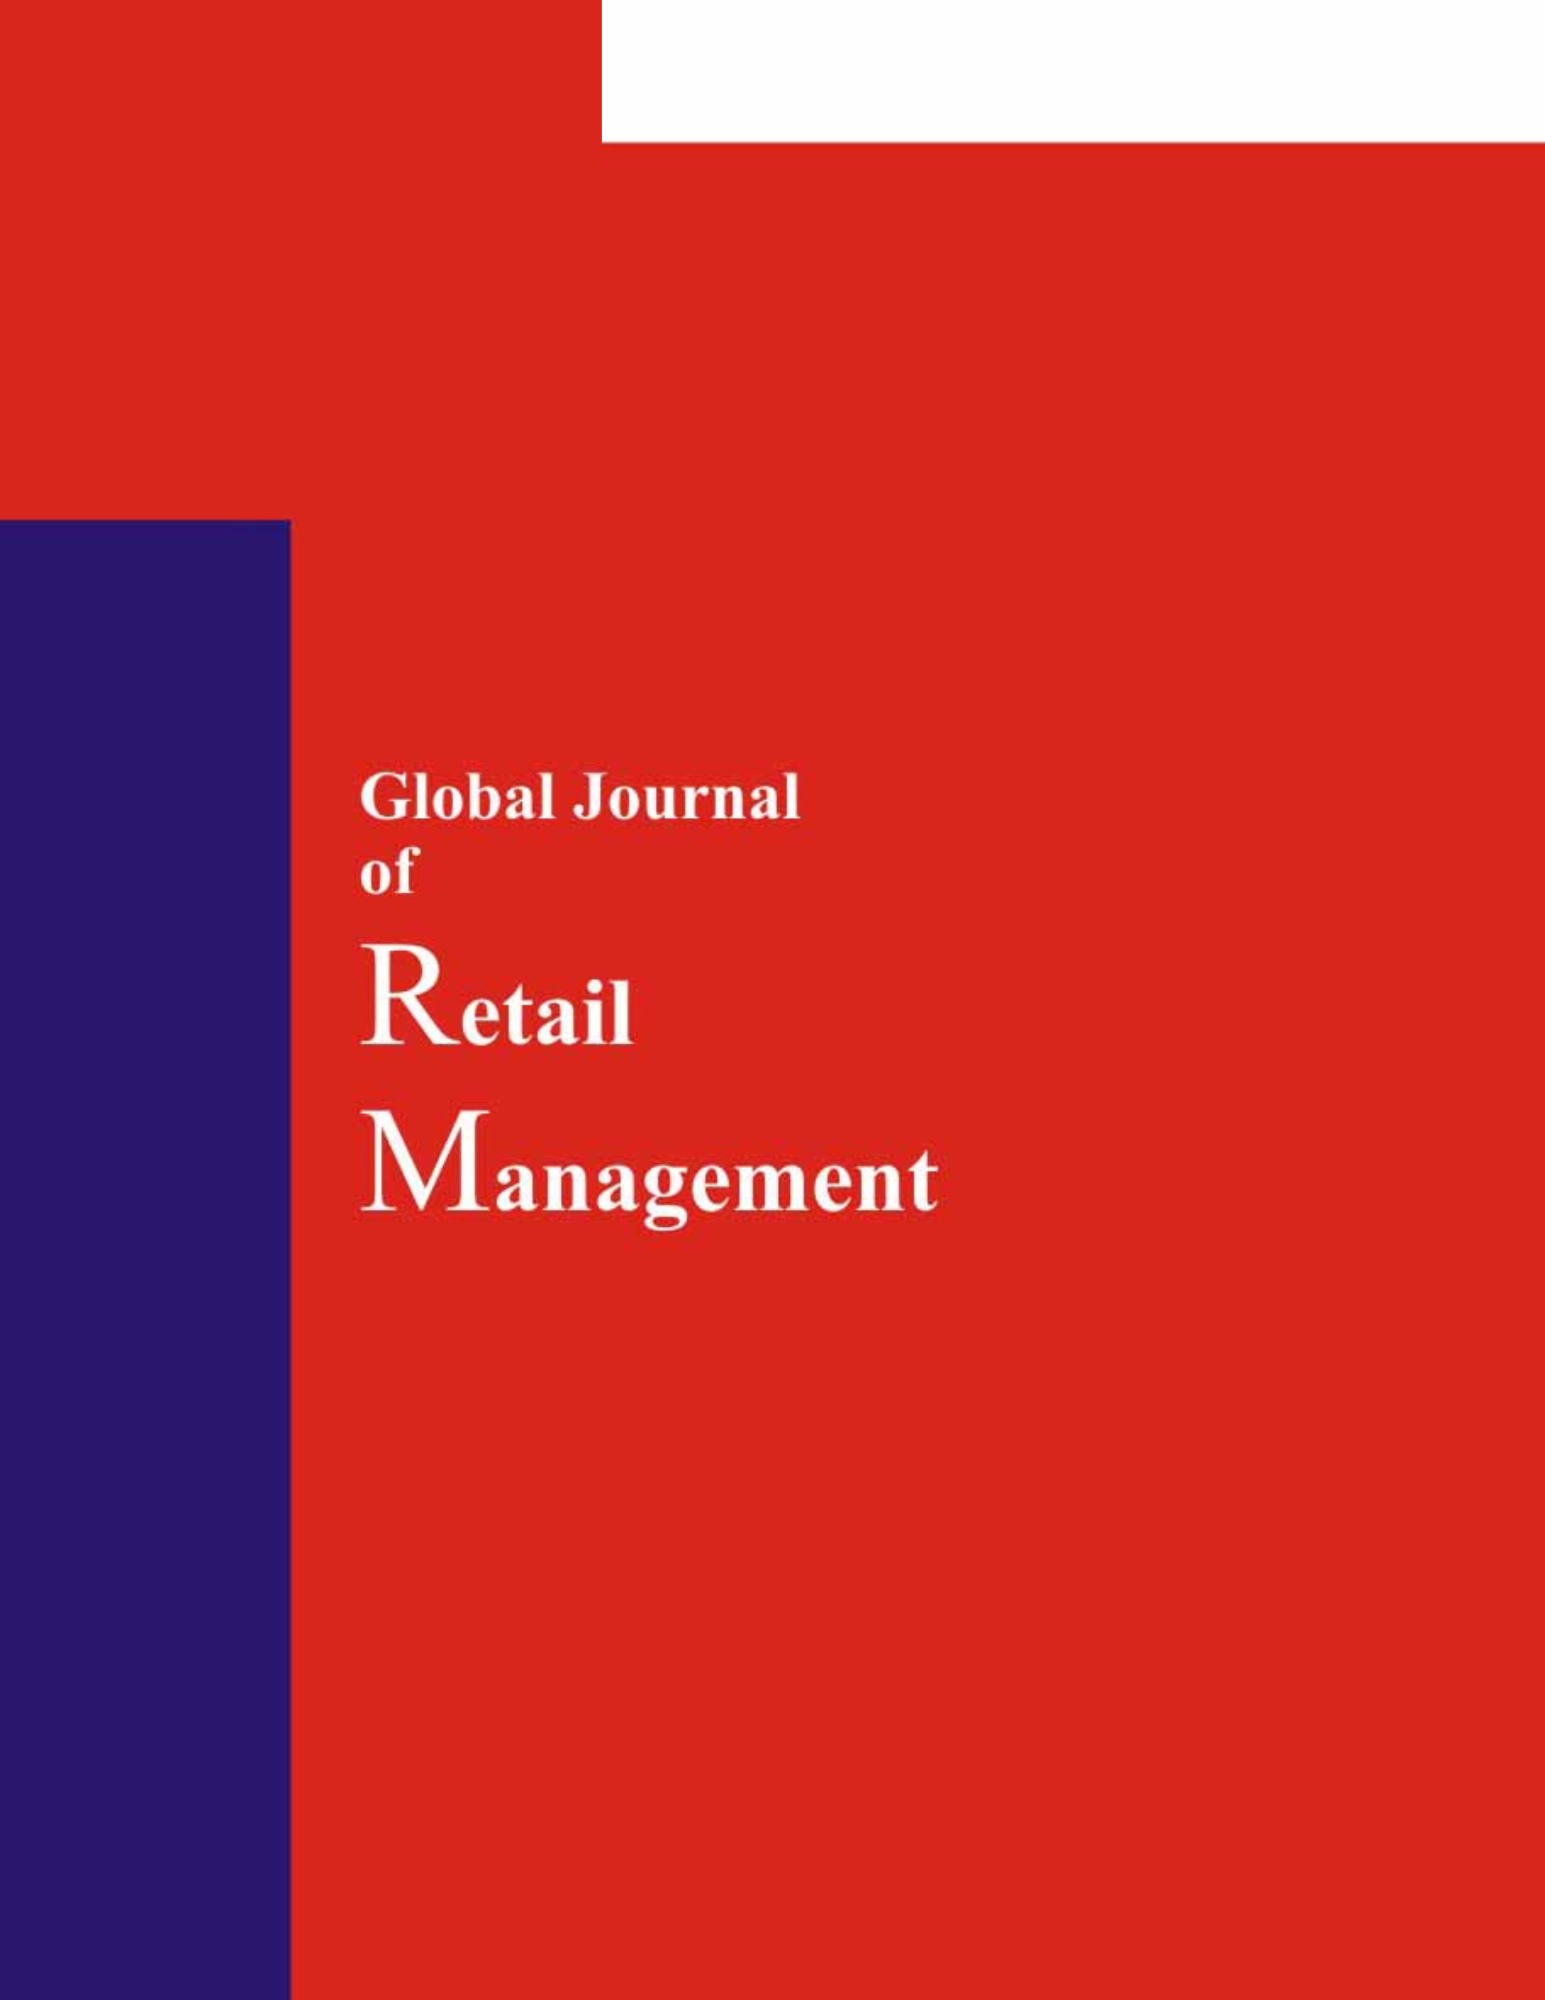 Global Journal of Retail Management  